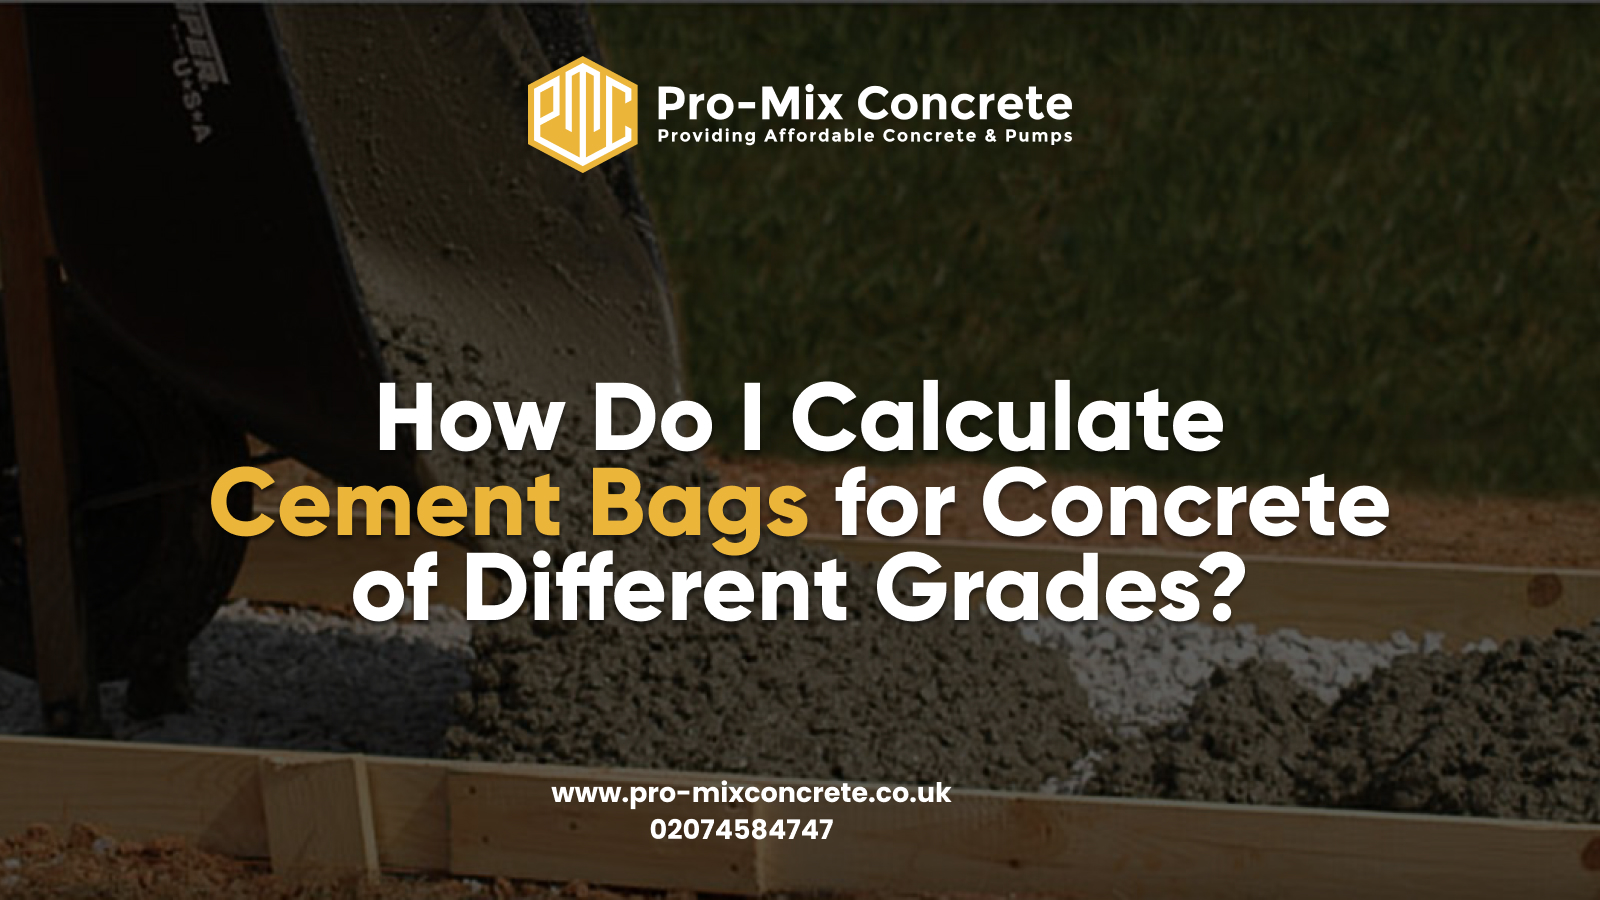 How Do I Calculate Cement Bags for Concrete of Different Grades?